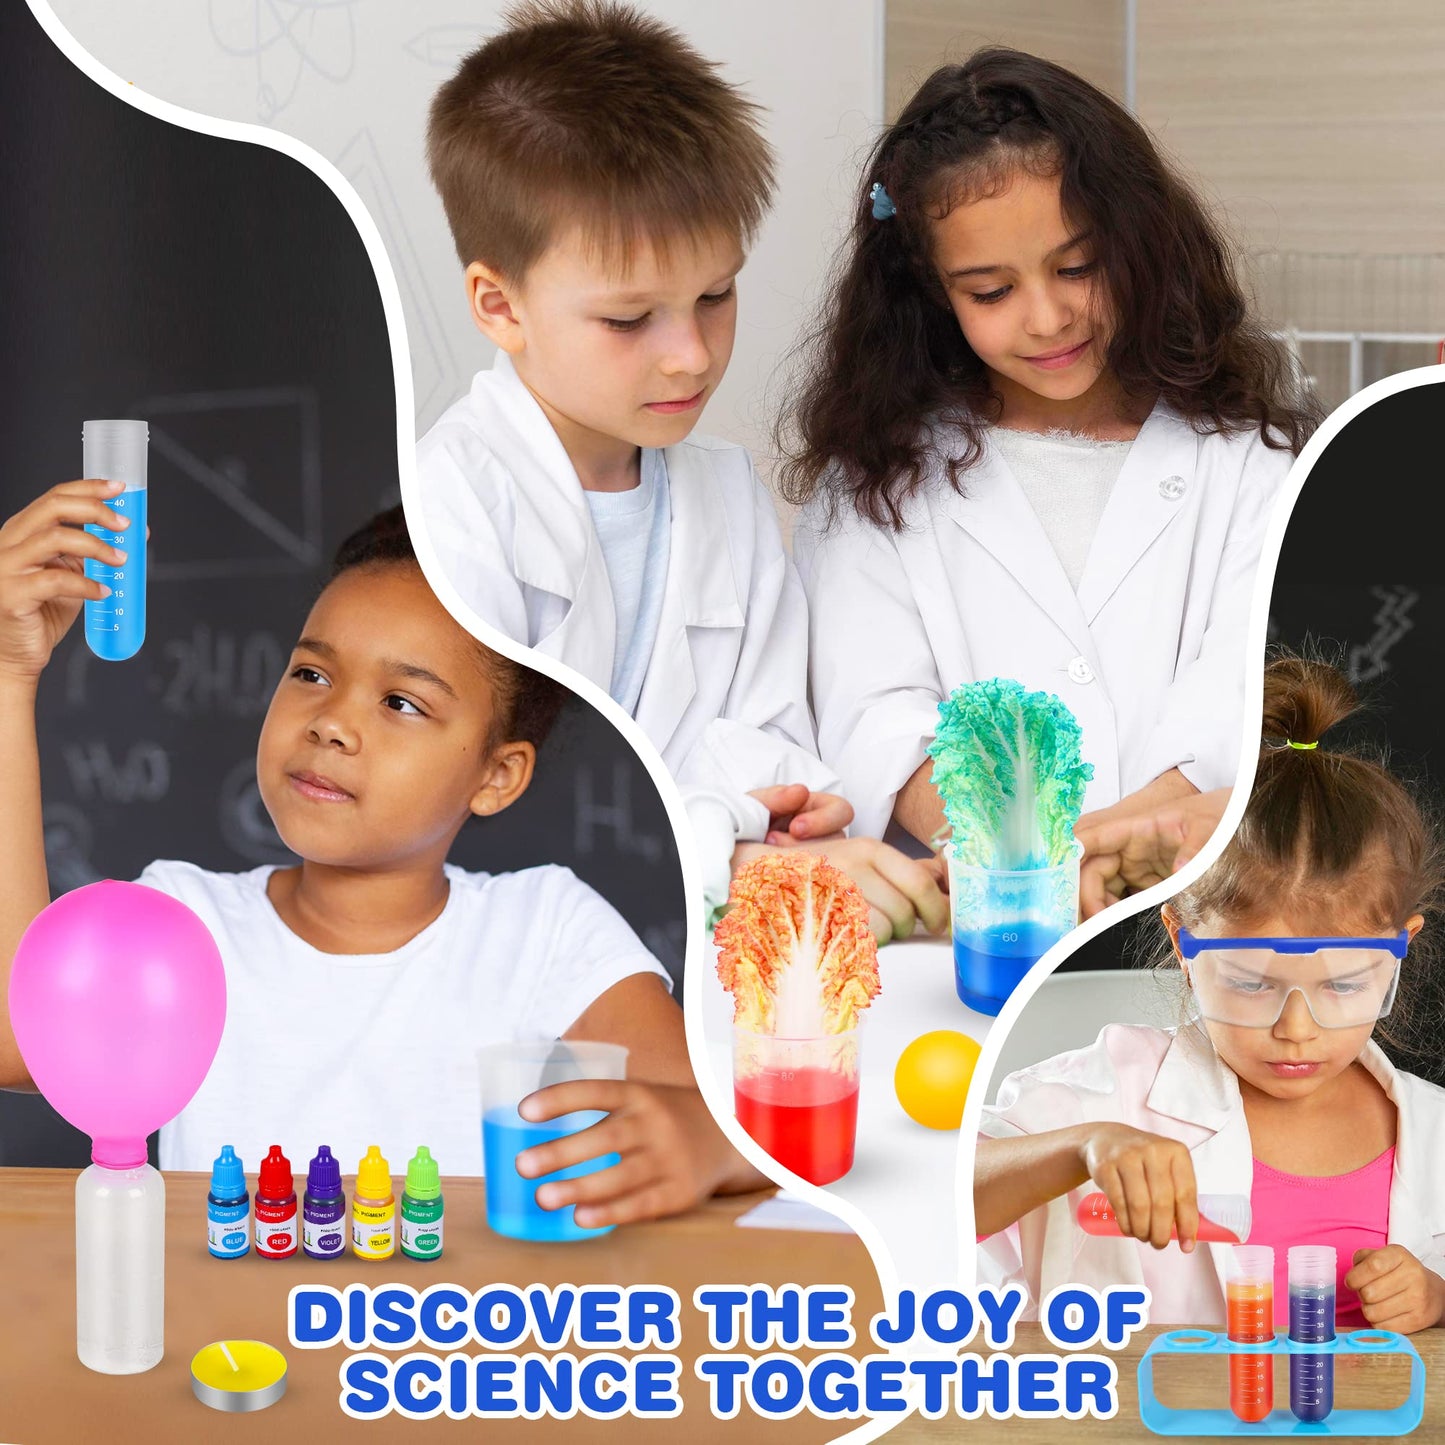 Science Kit for Kids,60 Science Lab Experiments,Scientist Costume Role Play STEM Educational Learning Scientific Tools,Birthday Gifts and Toys for 4 5 6 7 8 9 10-12 Years Old Boys Girls Kids